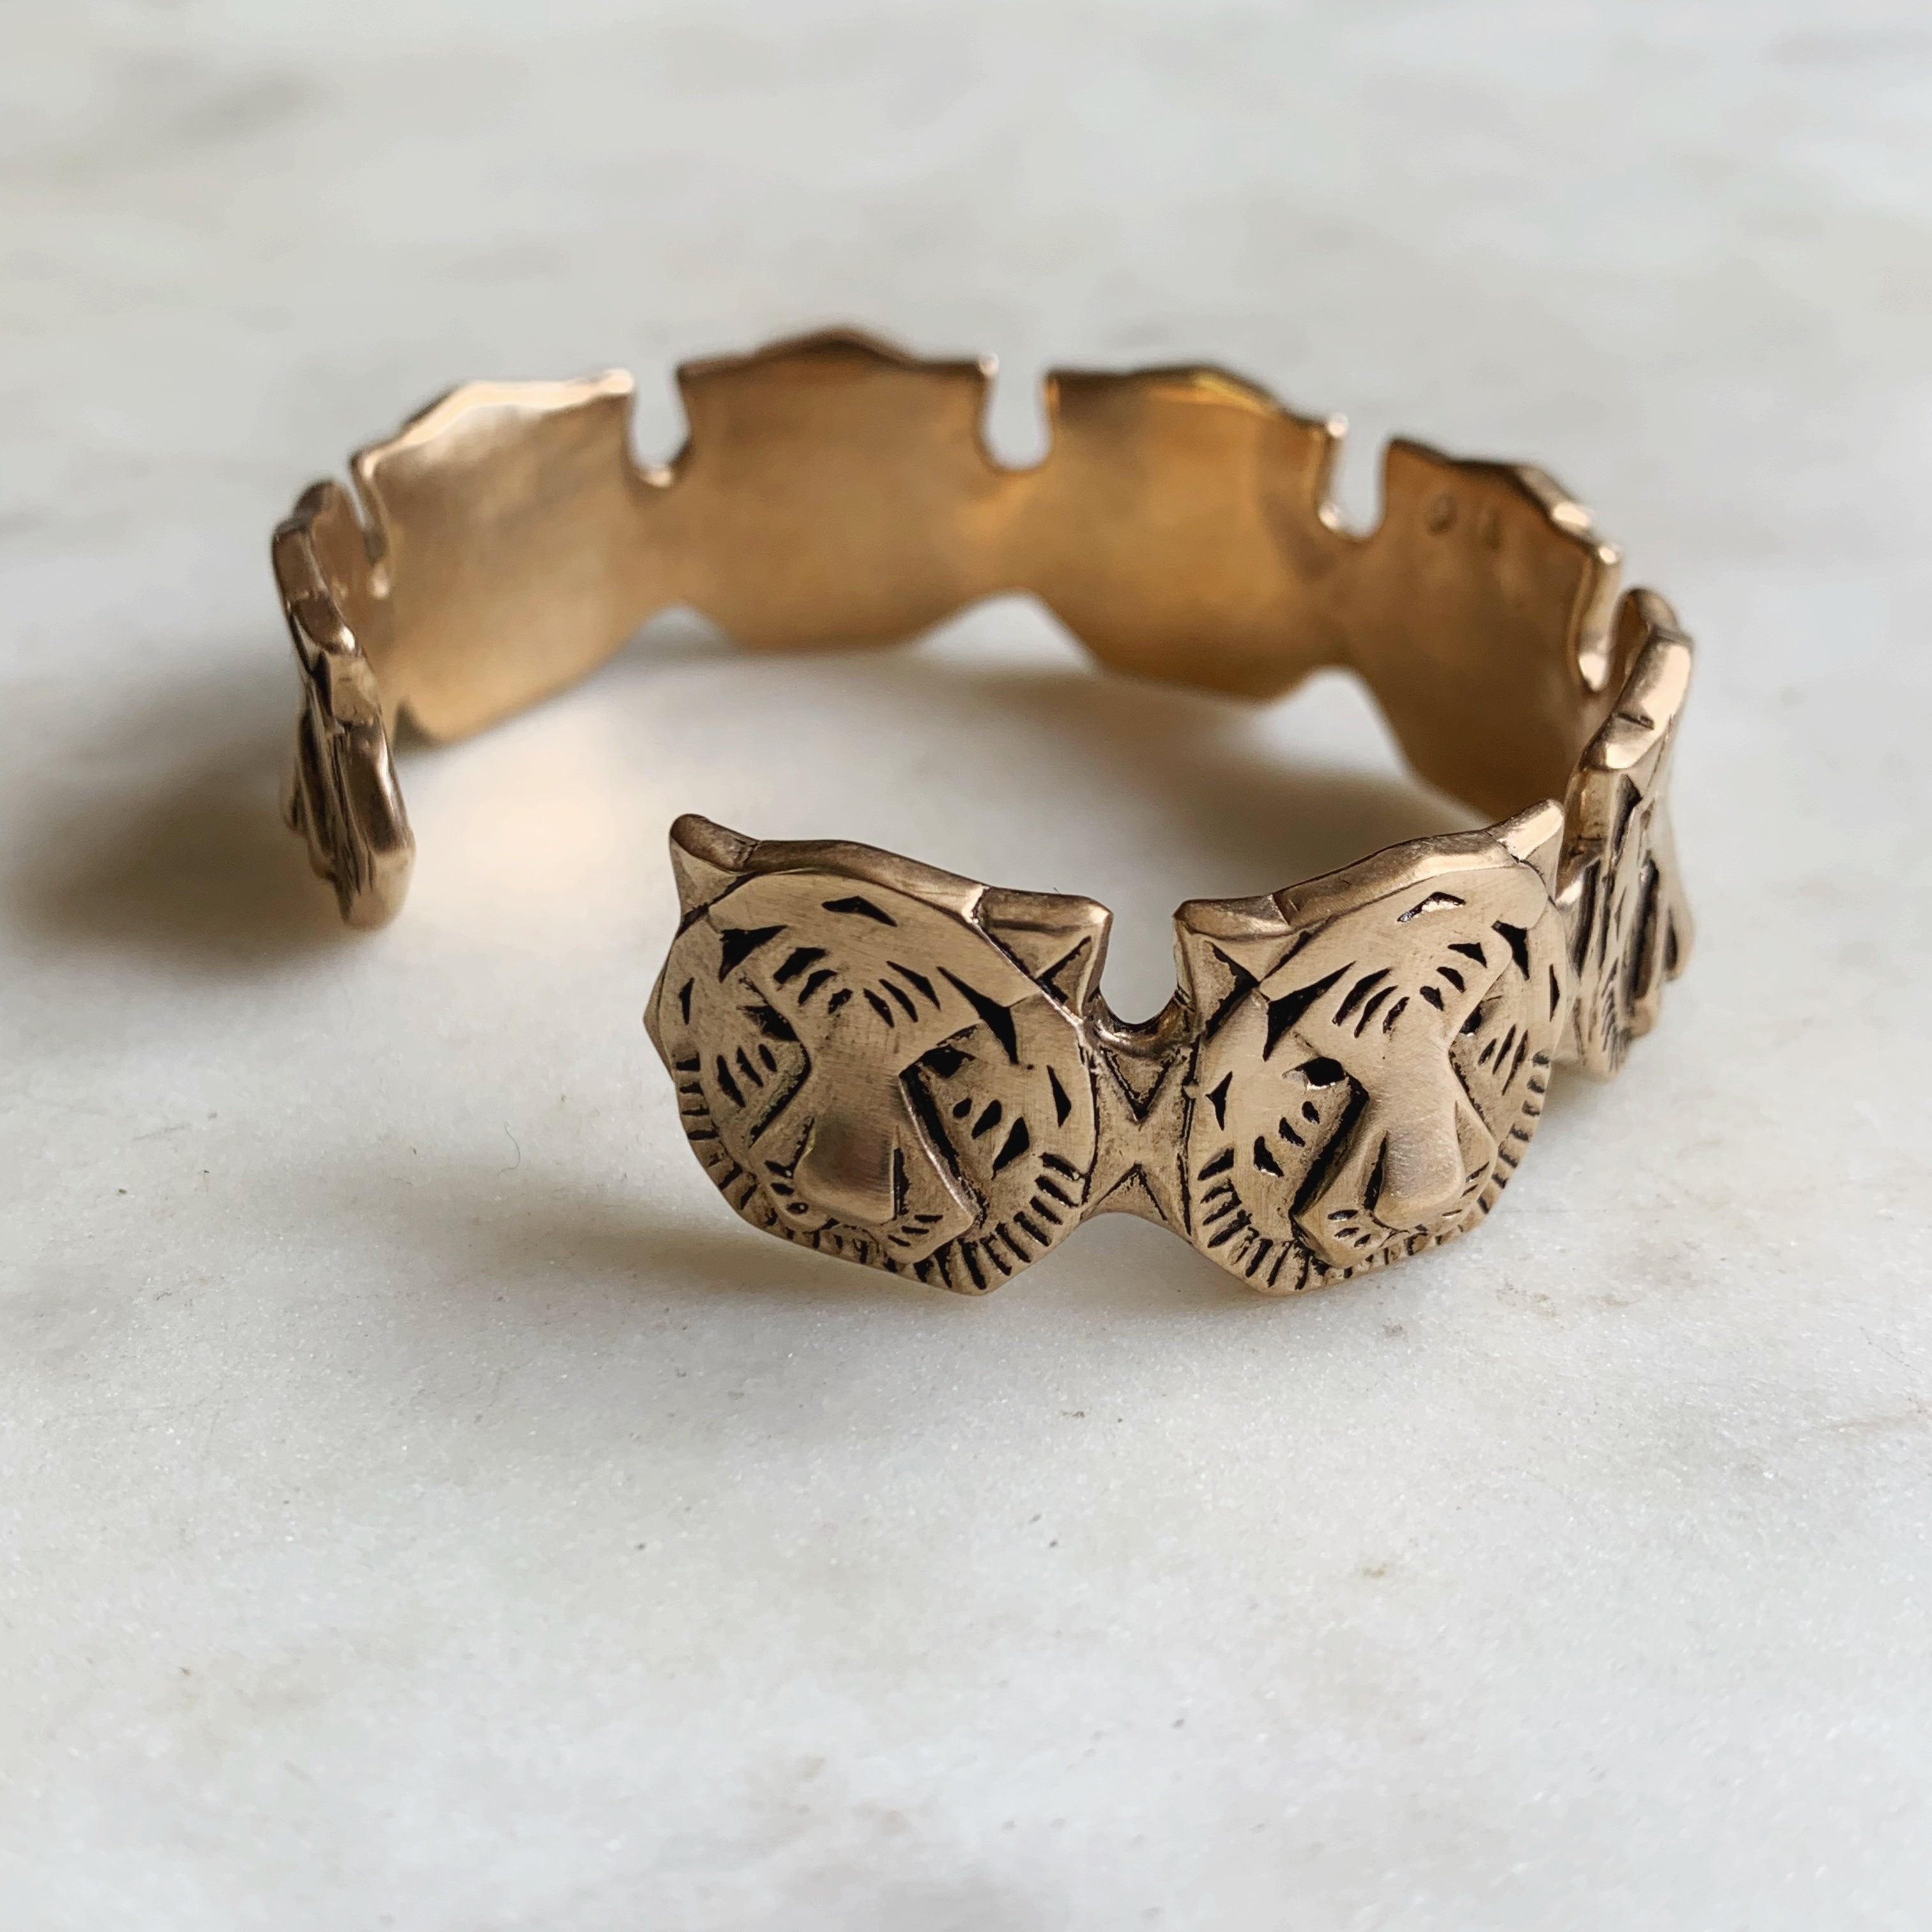 Gucci Tiger Head Bracelet in Gold with Diamonds | Bracelets gold diamond,  Gold, Jewelry collection